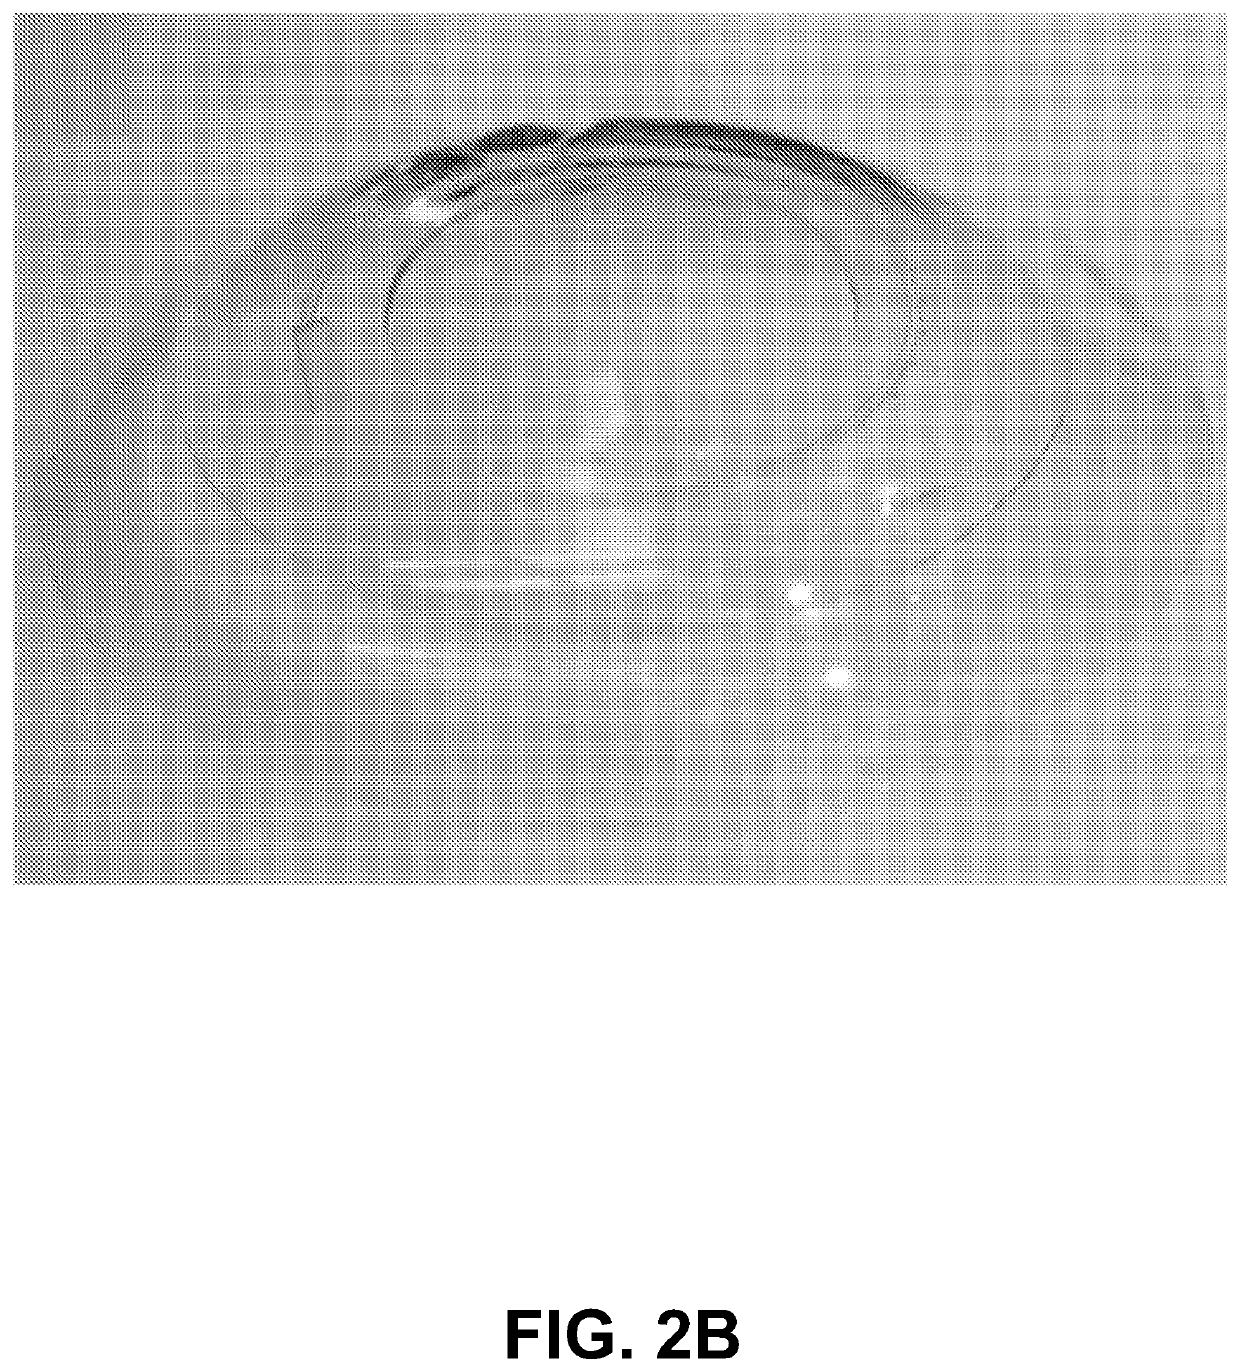 Closed microfluidic network for strain sensing embedded in a contact lens to monitor intraocular pressure